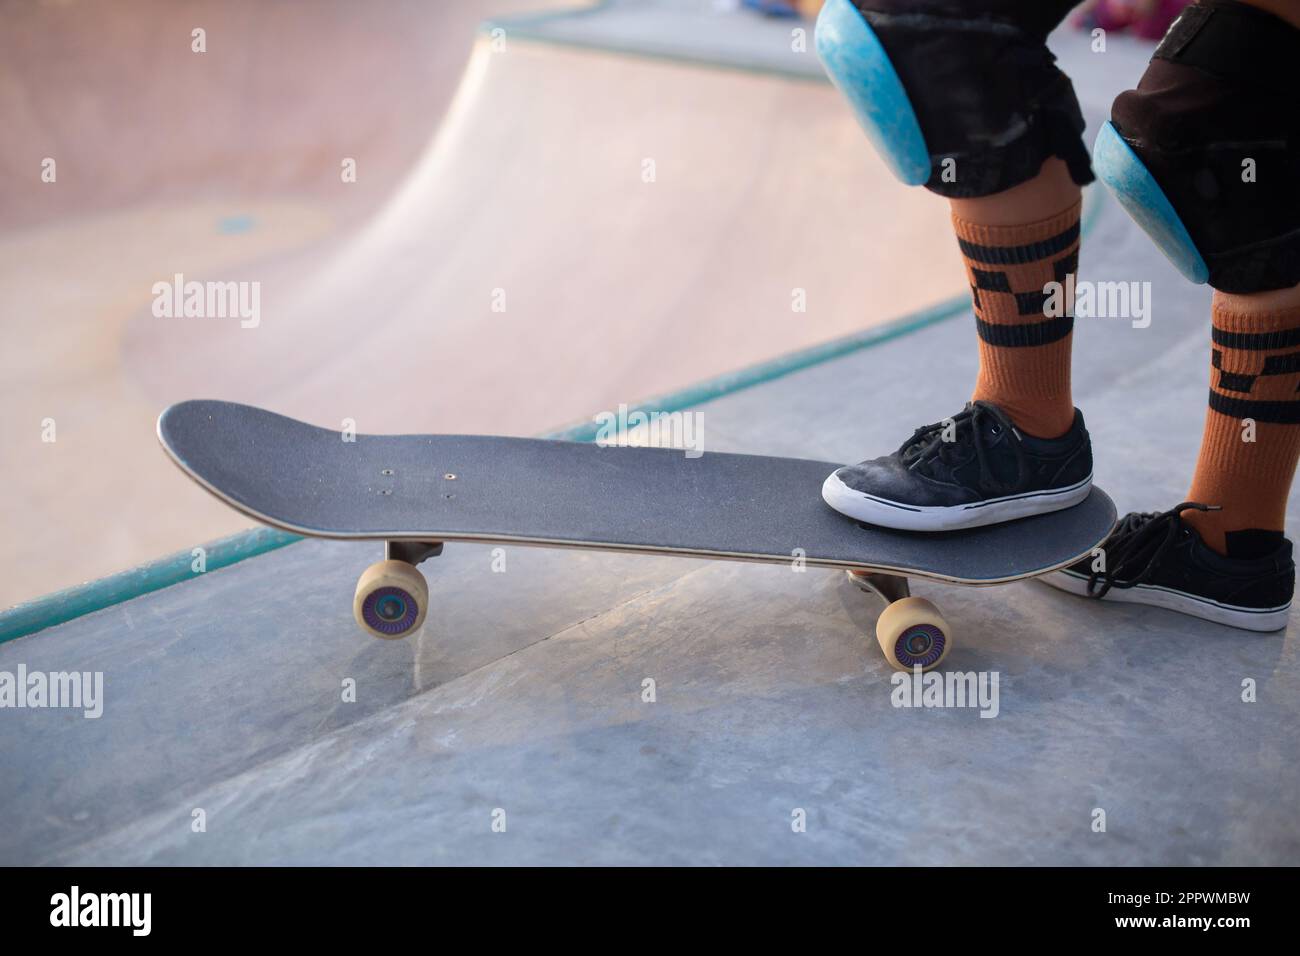 Skateboarding themed photograph with a natural lighting Stock Photo